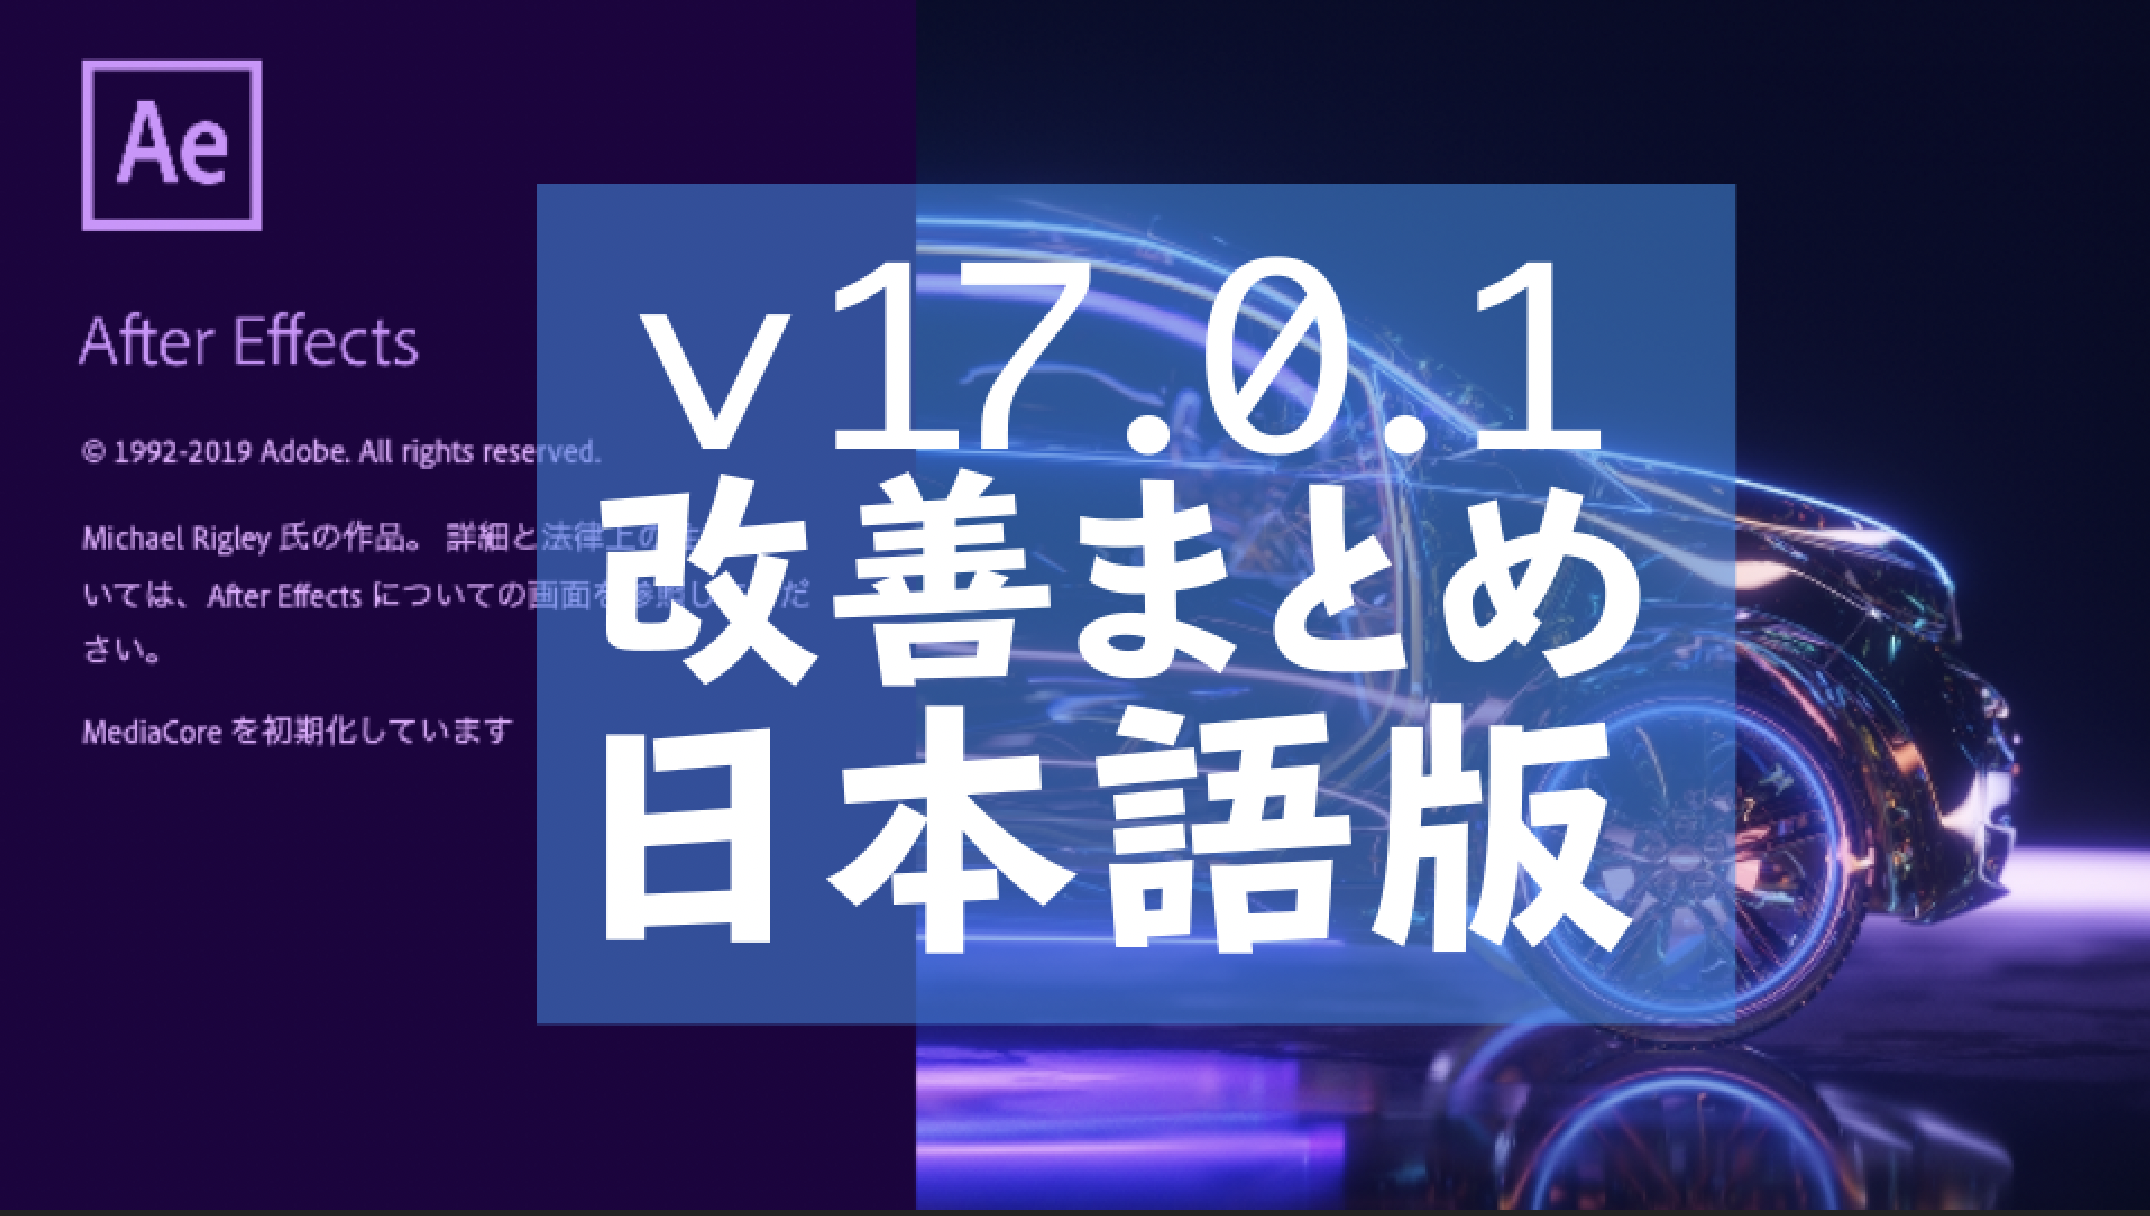 [AfterEffects]17.0.1のアップデート日本語化まとめ